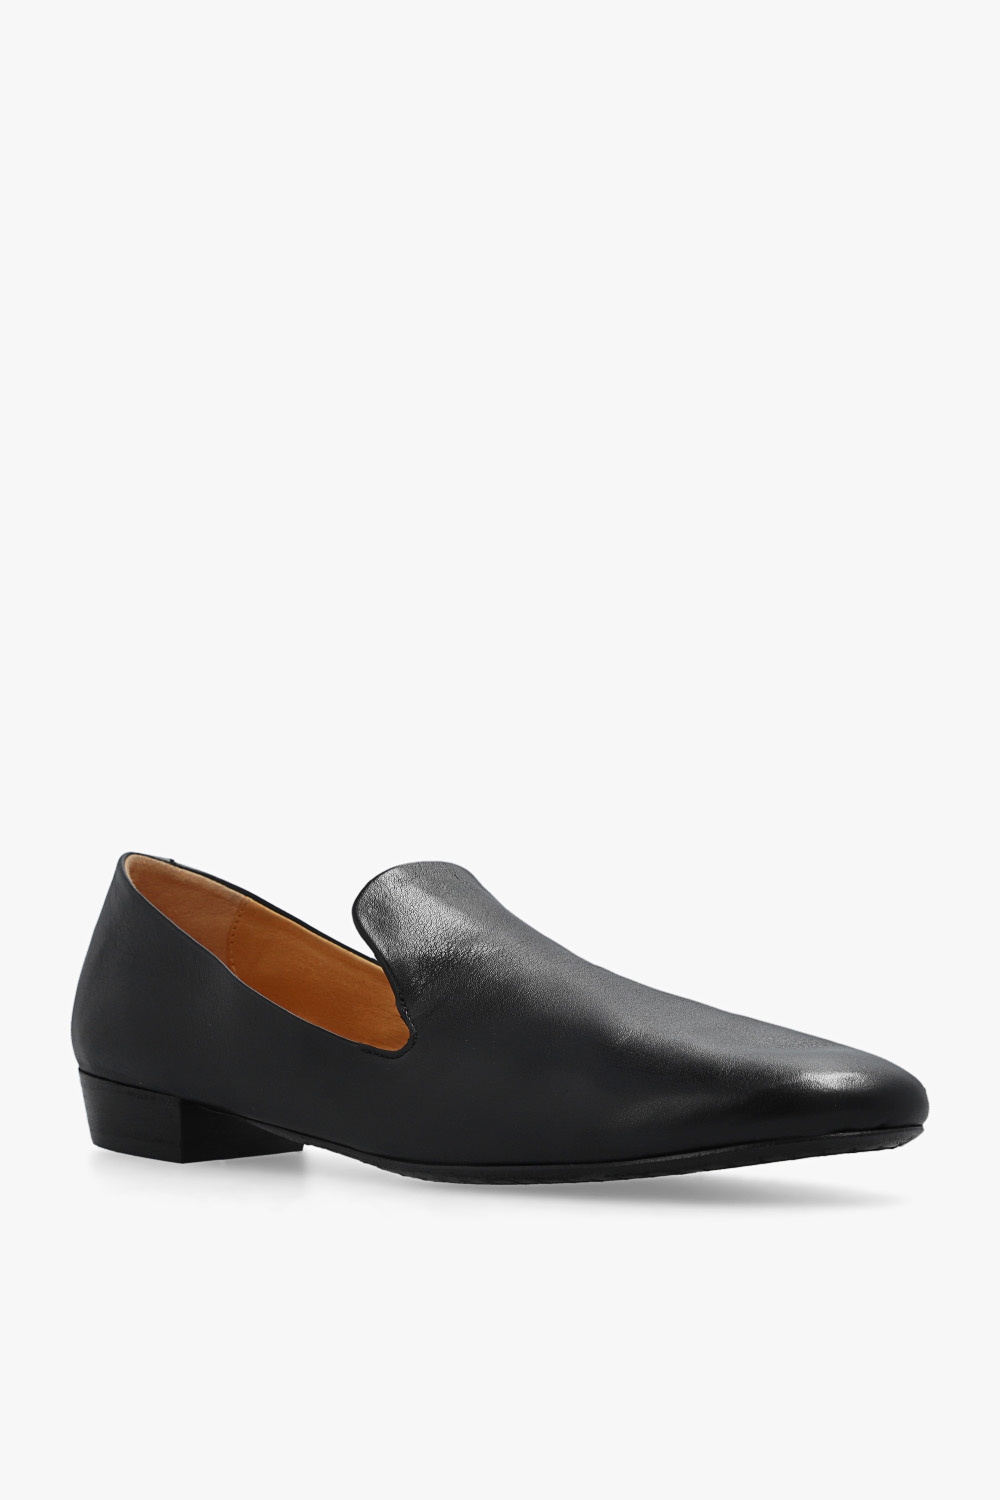 MarBrendy ‘Coltellino’ leather shoes